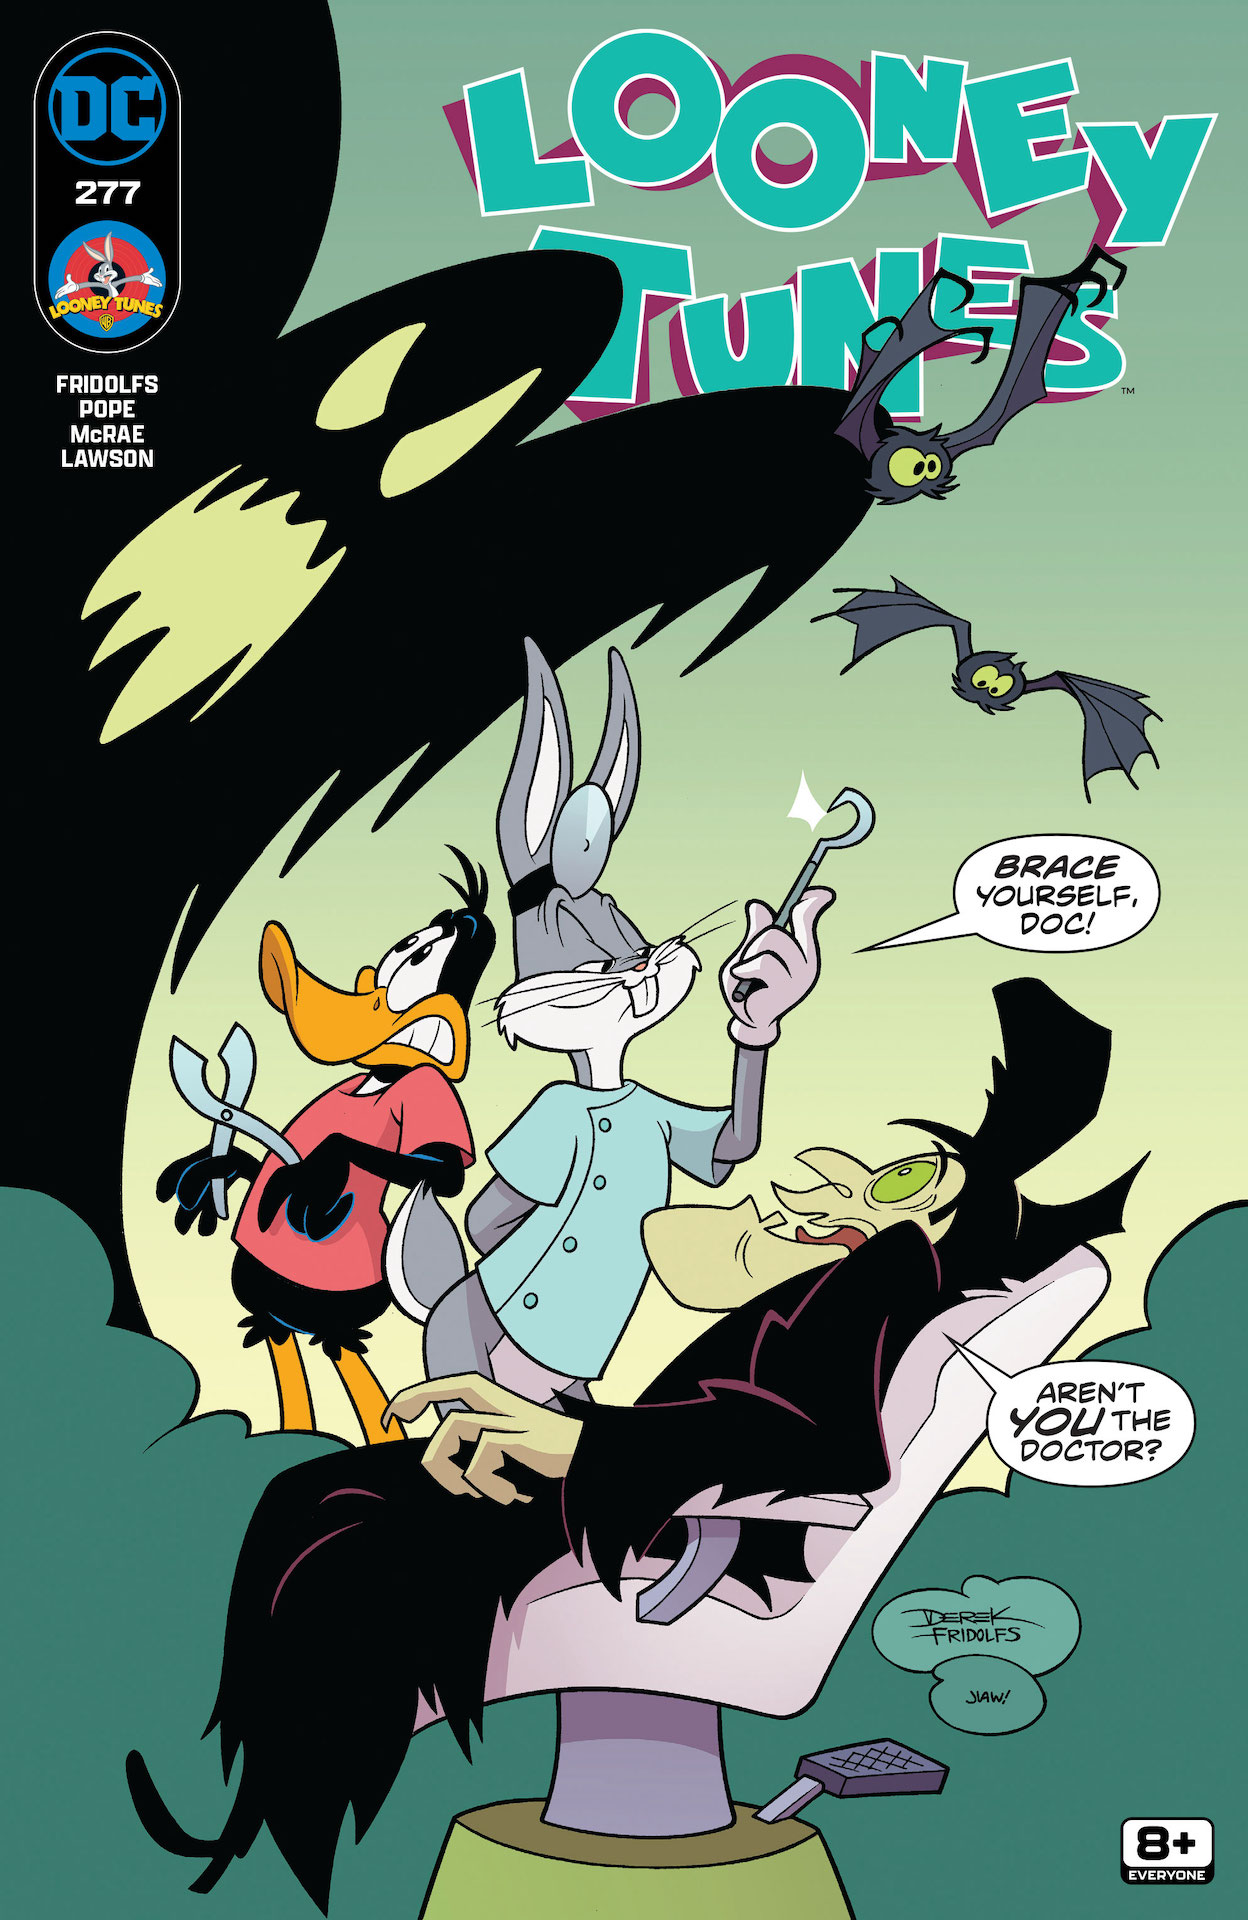 DC Preview: Looney Tunes #277